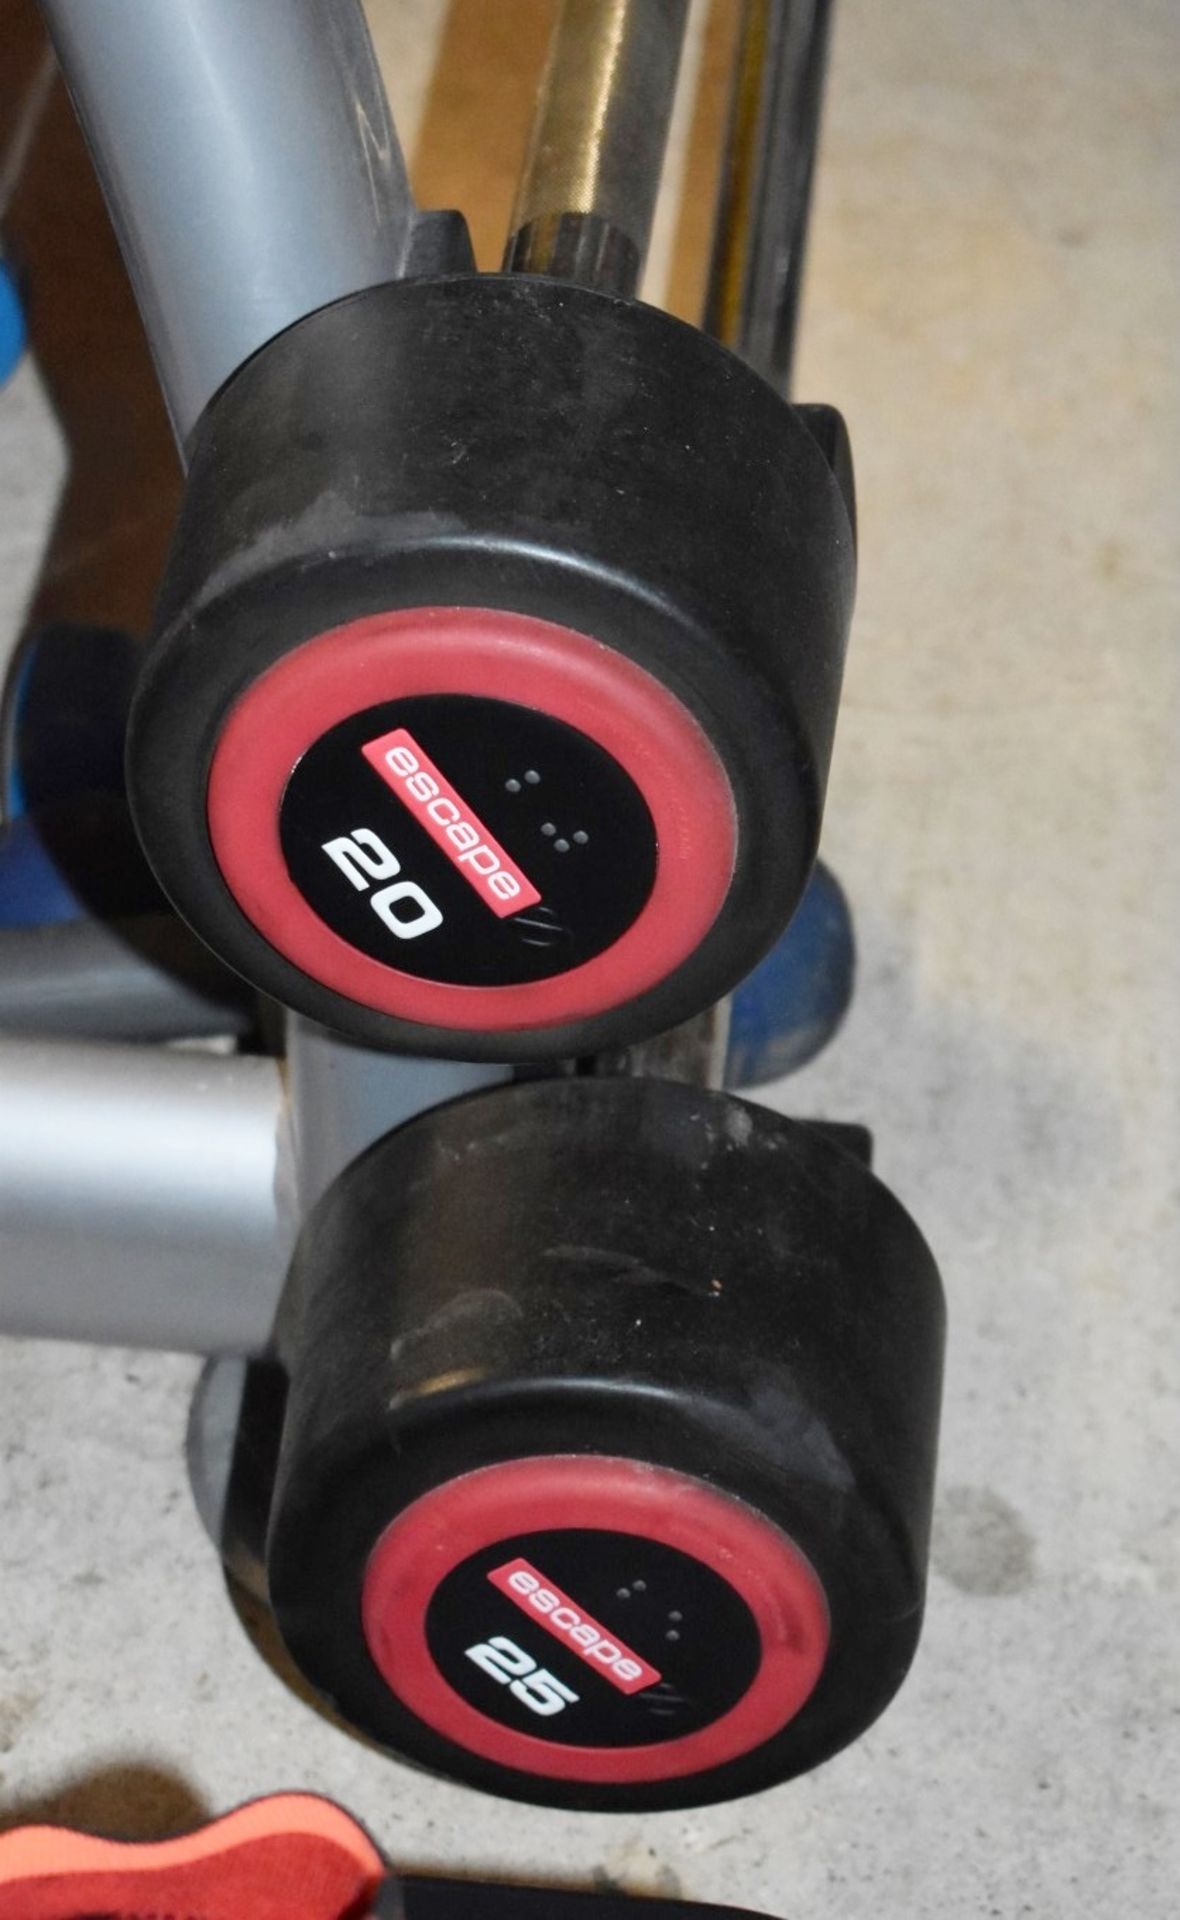 8 x Escape Polyurethane Barbell Weights - Includes 10kg to 45kg Barbells and Rubber Barbell Rack - - Image 5 of 6